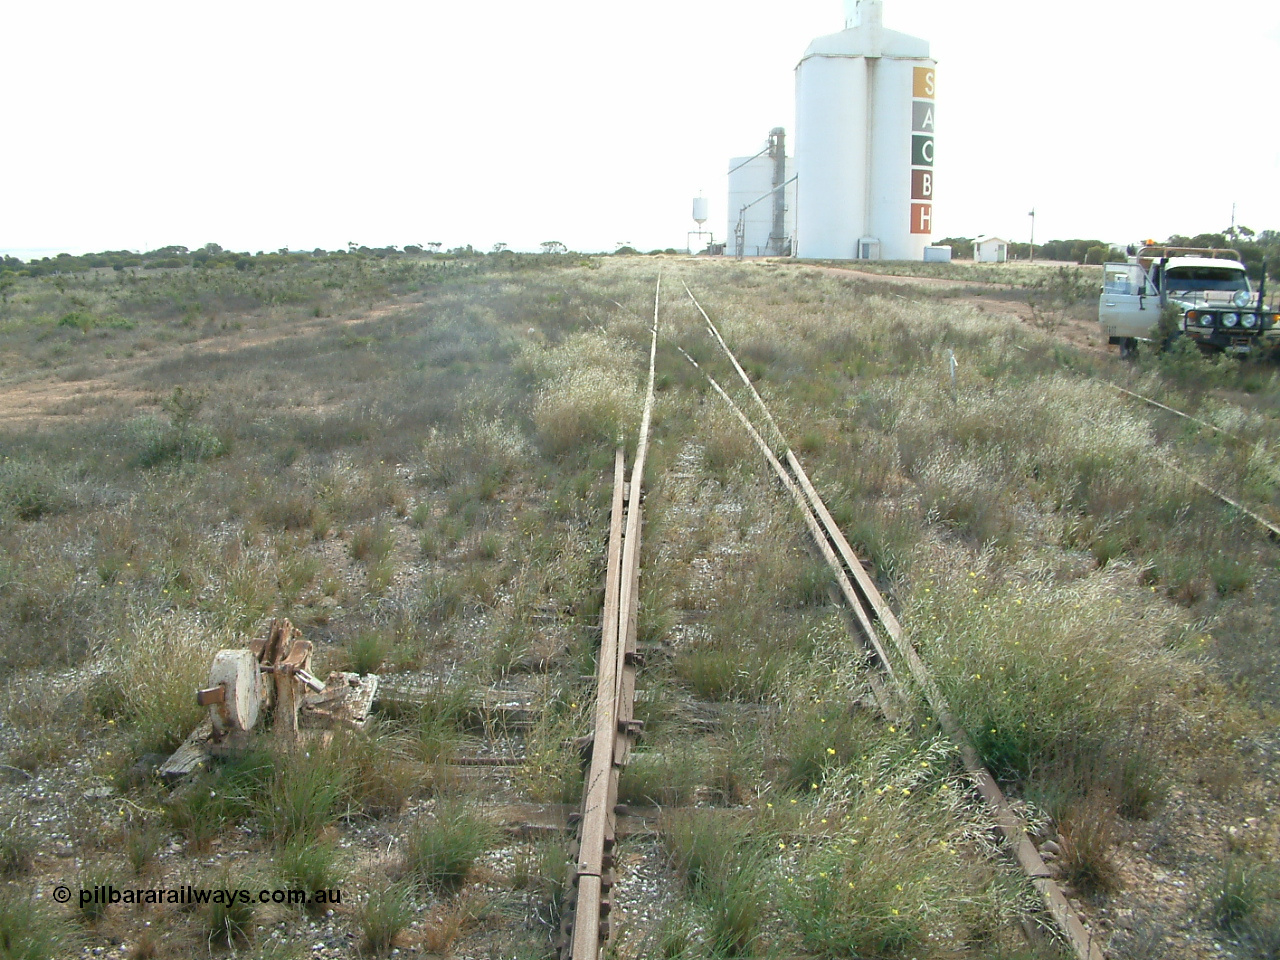 030414 154516
Penong , goods loop off to the left, grain loop on the right in the grass. Concrete silo block 2 with newer Ascom style complex behind that as Block 1.
